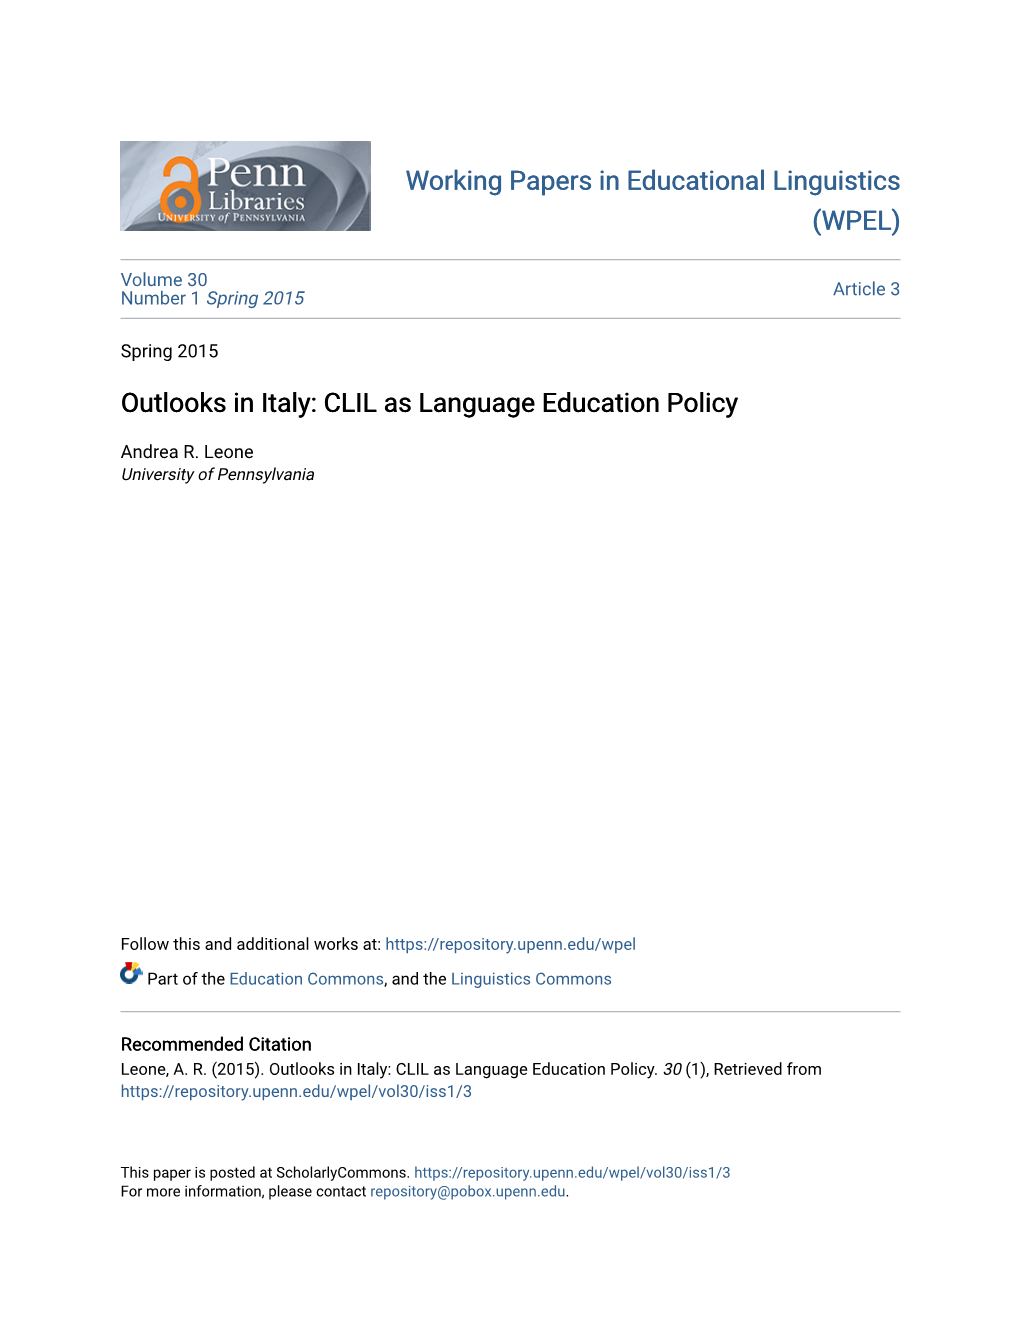 Outlooks in Italy: CLIL As Language Education Policy